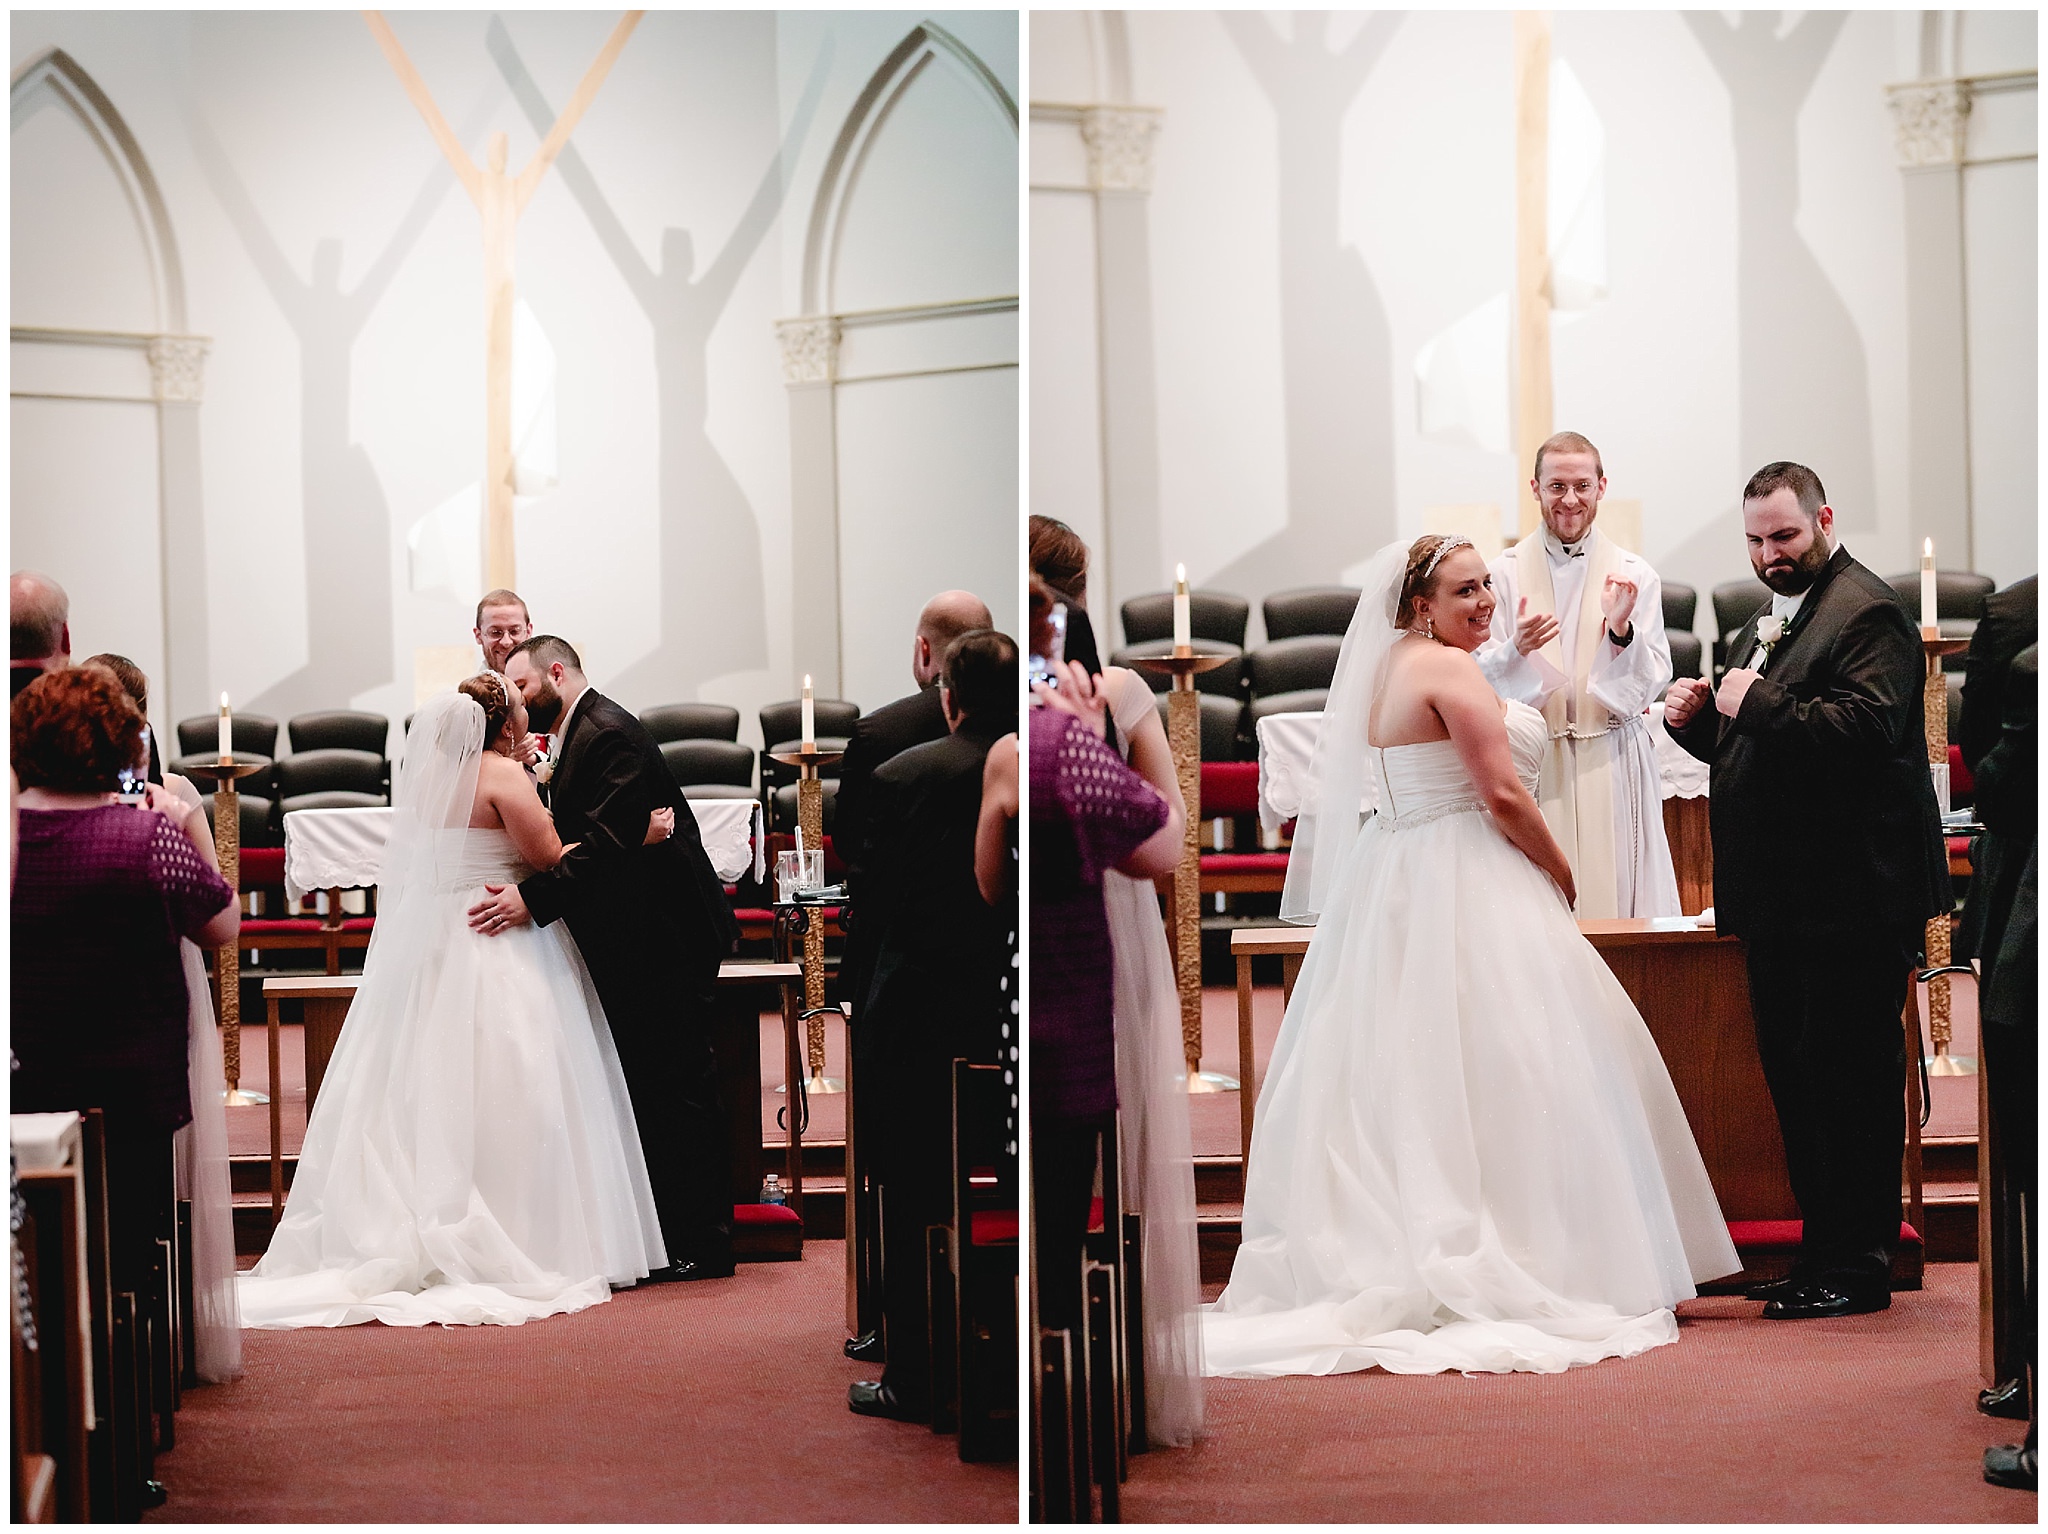 First kiss during a Duquesne University wedding ceremony